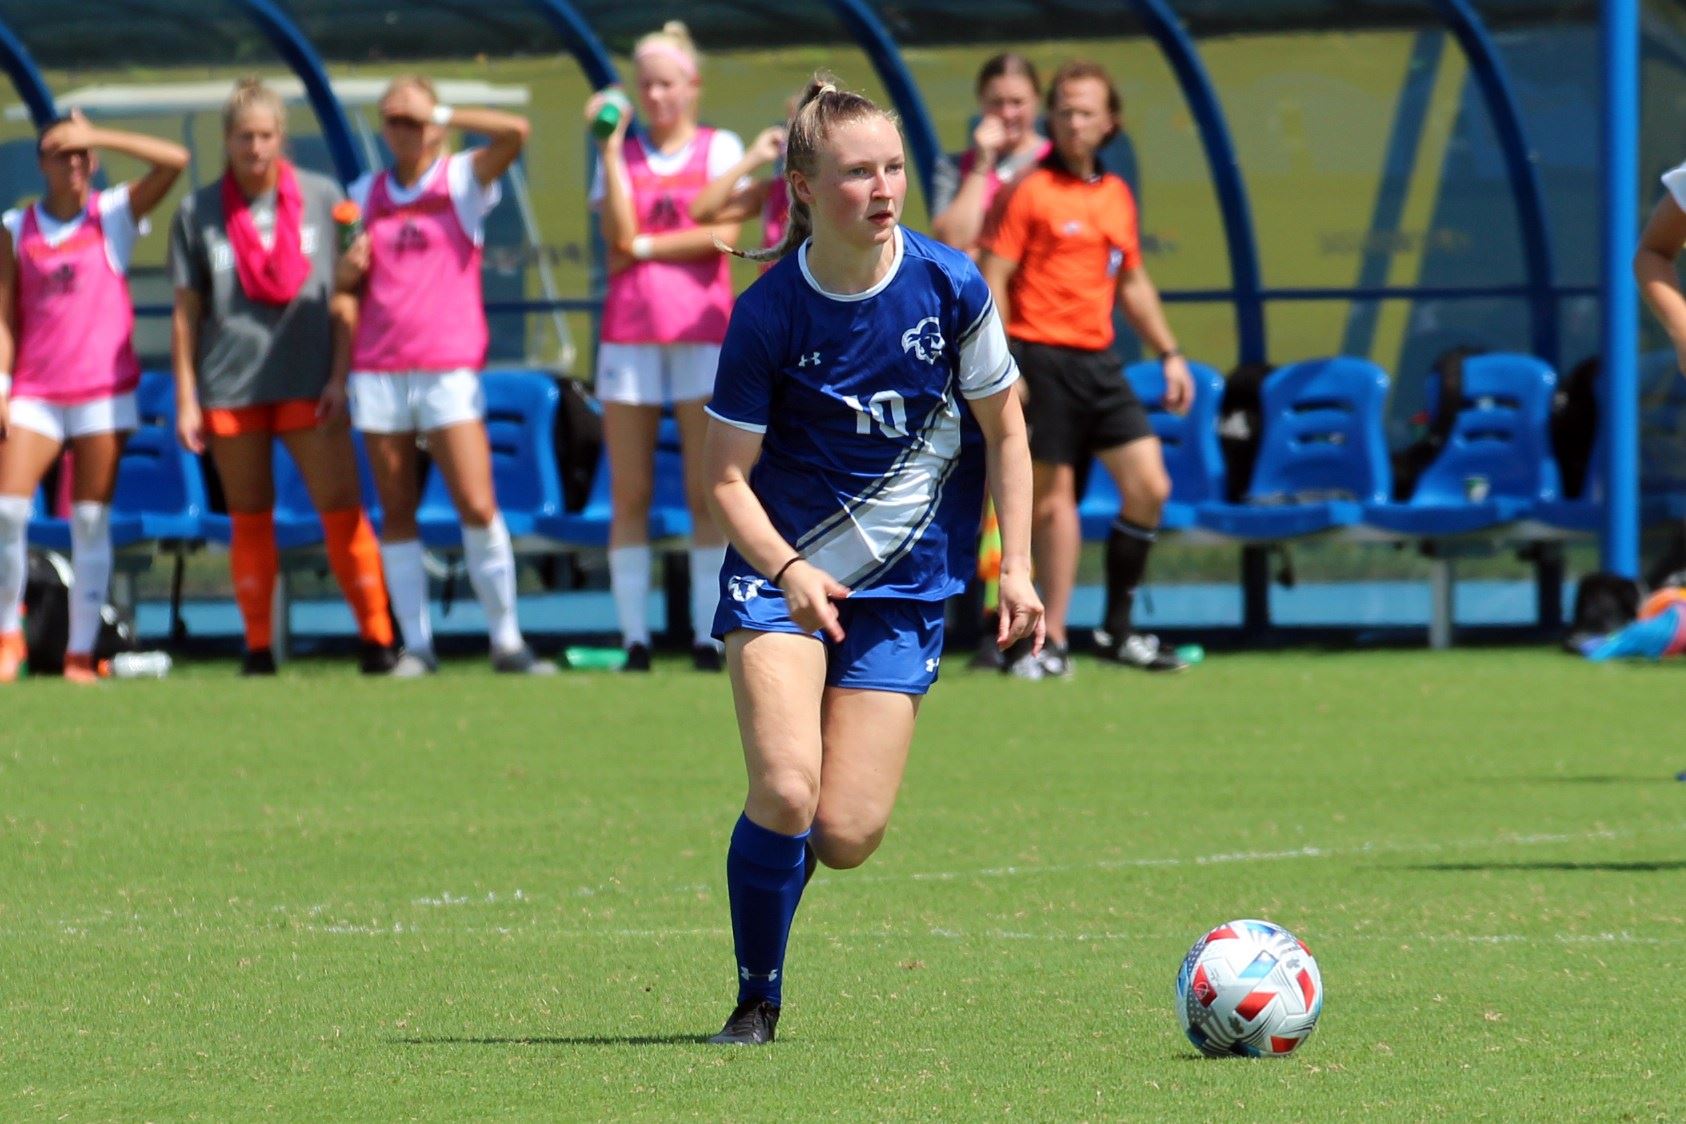 A Seton Hall women's soccer player dribbles the ball during a game on the road.